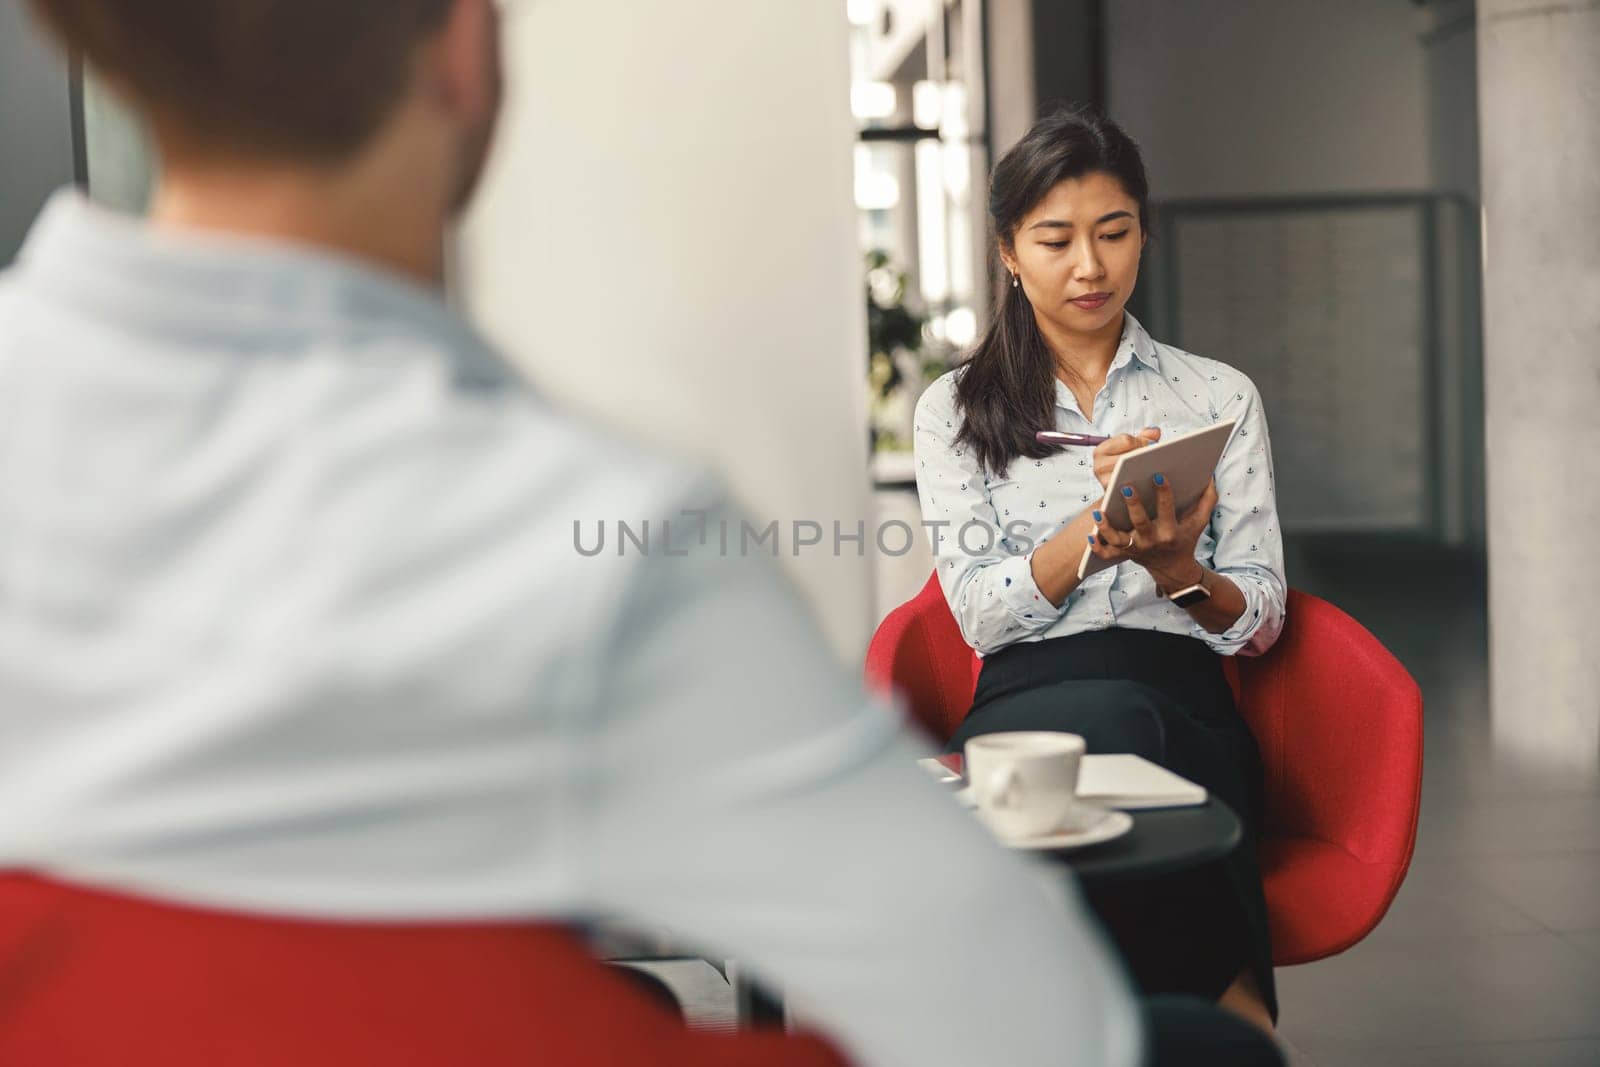 HR manager looking on digital tablet during interview with job candidate. High quality photo